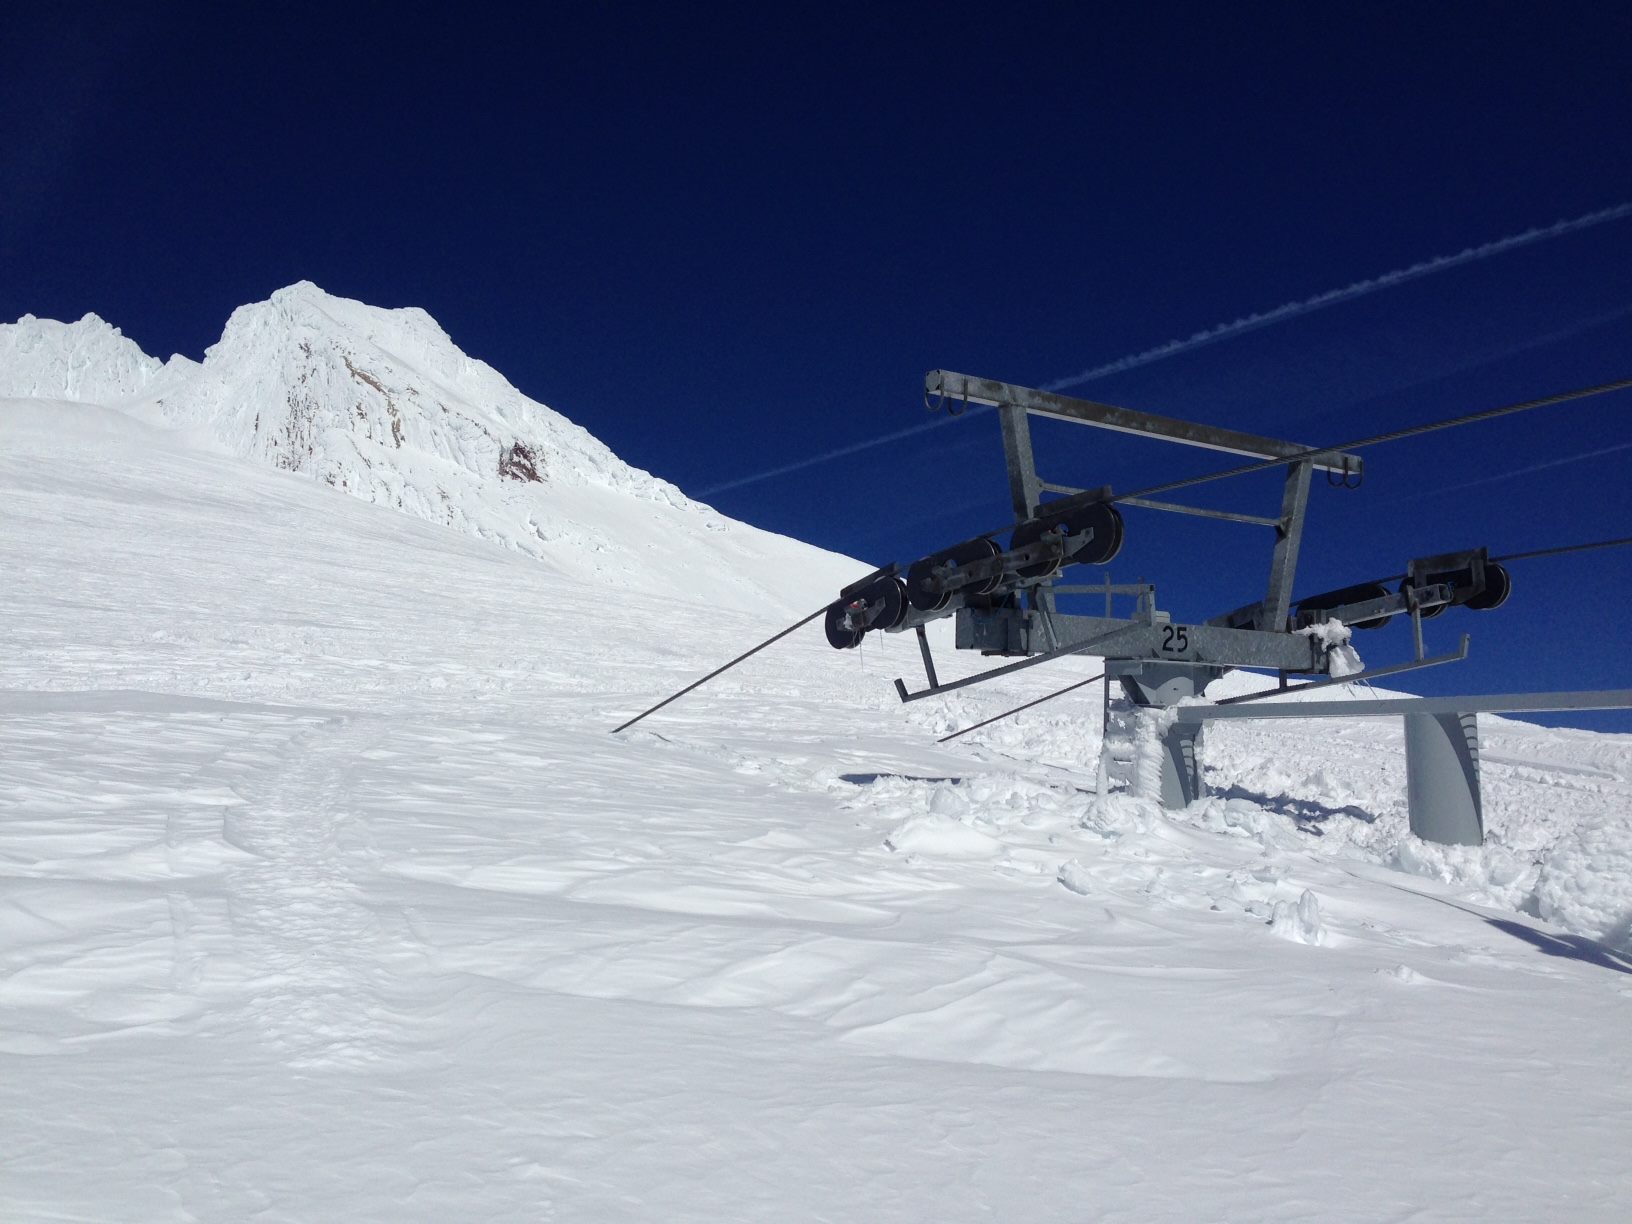 Palmer Chairlift, Mt. Hood, OR on March 18th, 2016. photo: Timberline ski resort